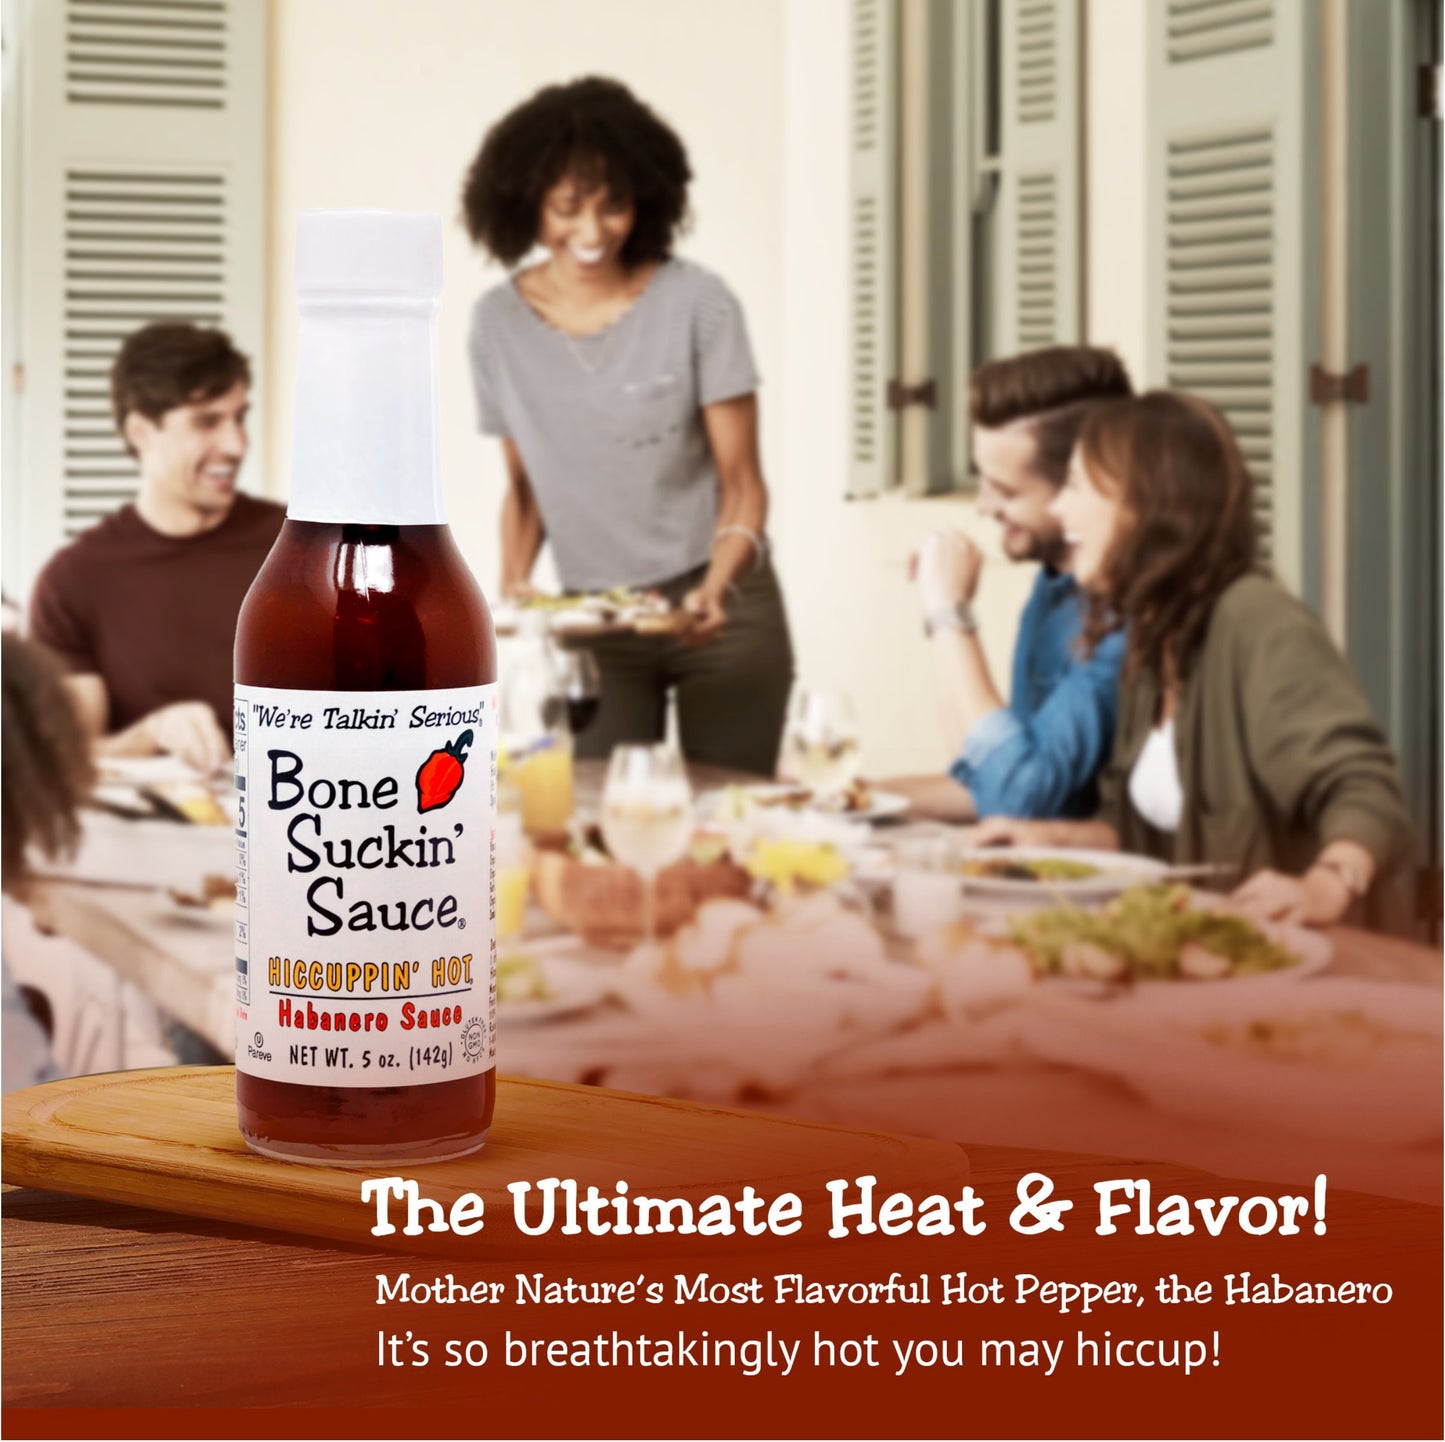 The Ultimate Heat & Flavor! Mother Nature's Most Flavorful Hot Pepper, the Habanero - It's so breathtakingly hot you may hiccup!